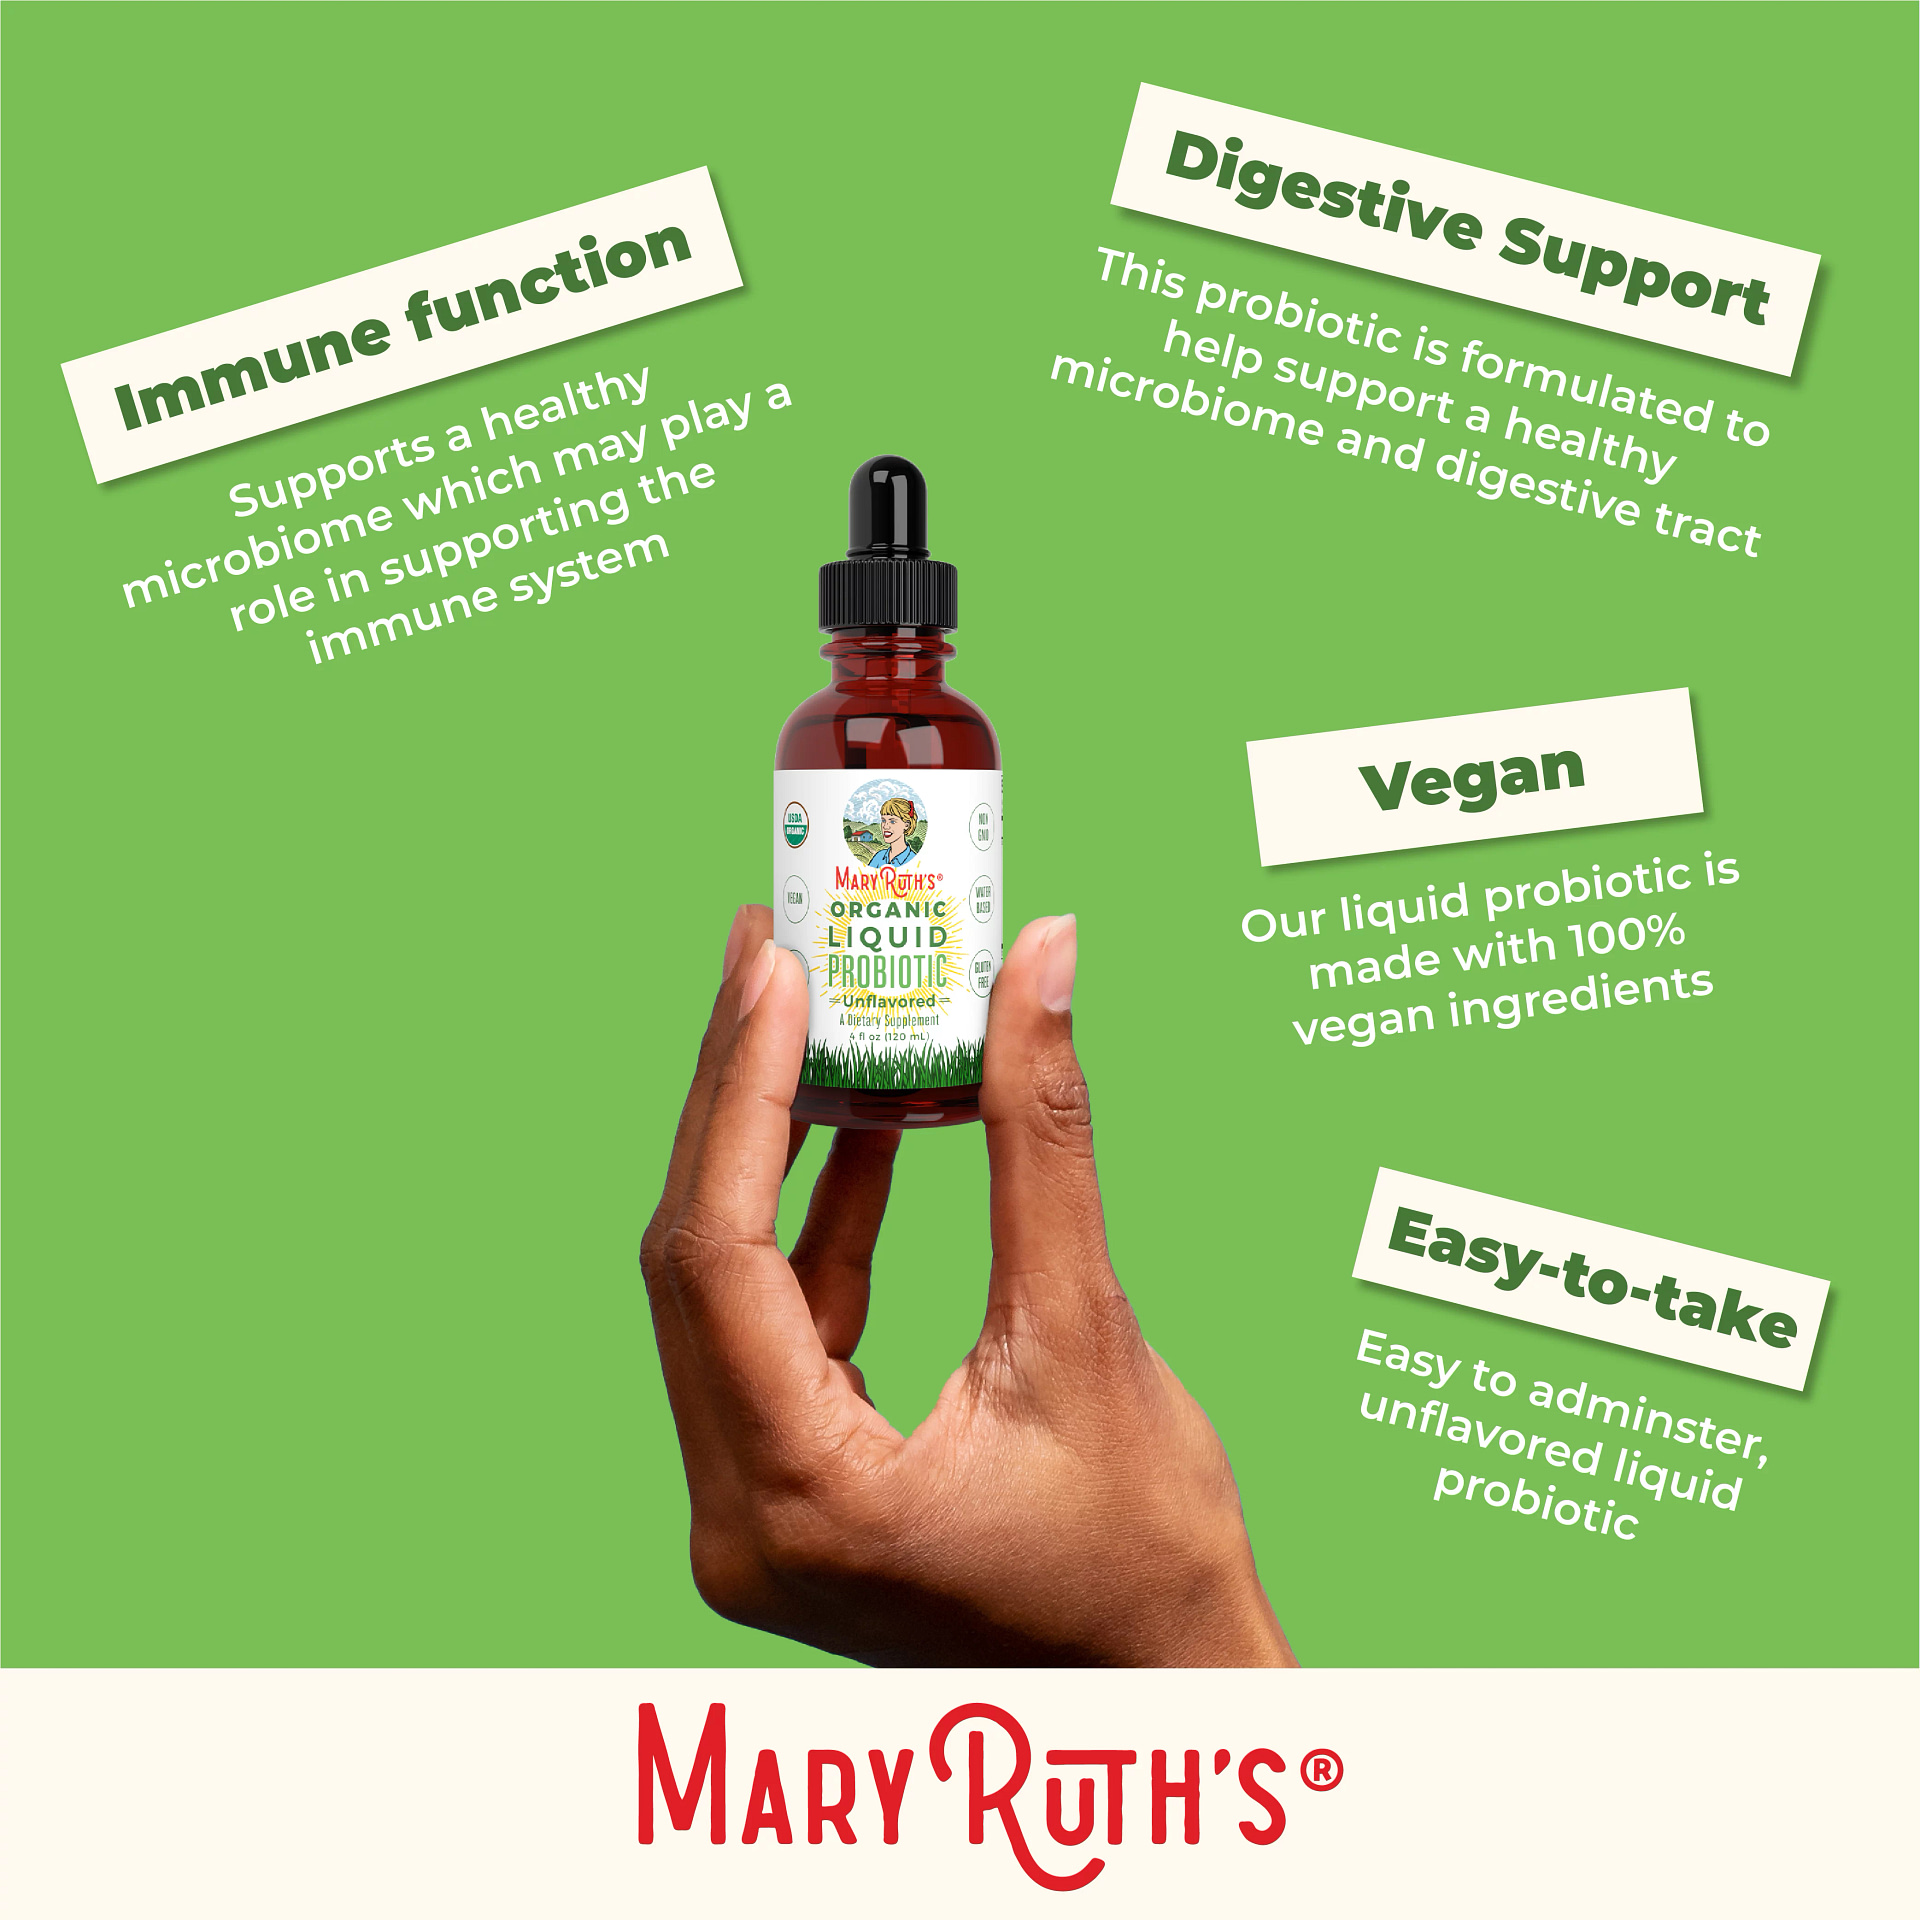 Mary Ruth's Probiotic